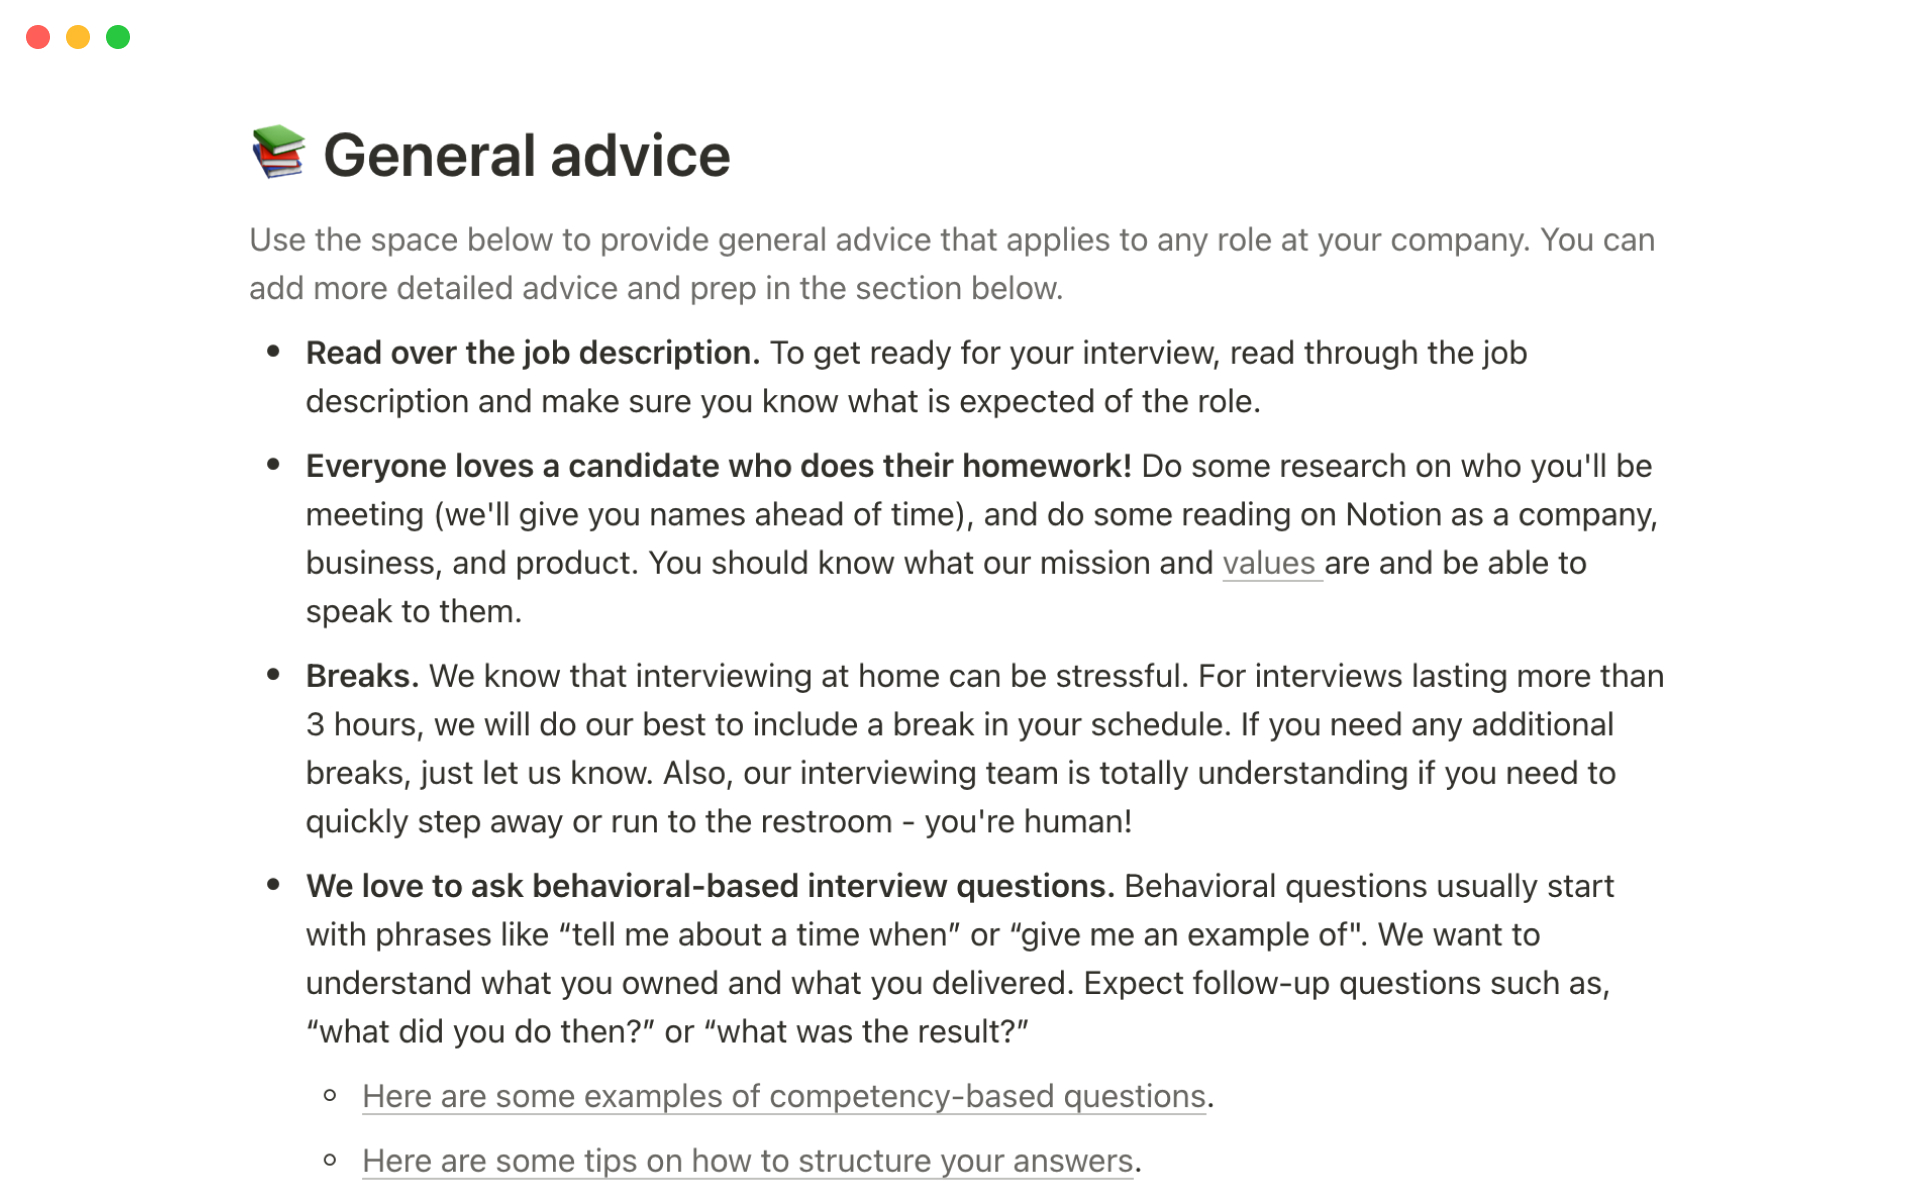 Notion’s guide for interviewing at Notion | Notion Template